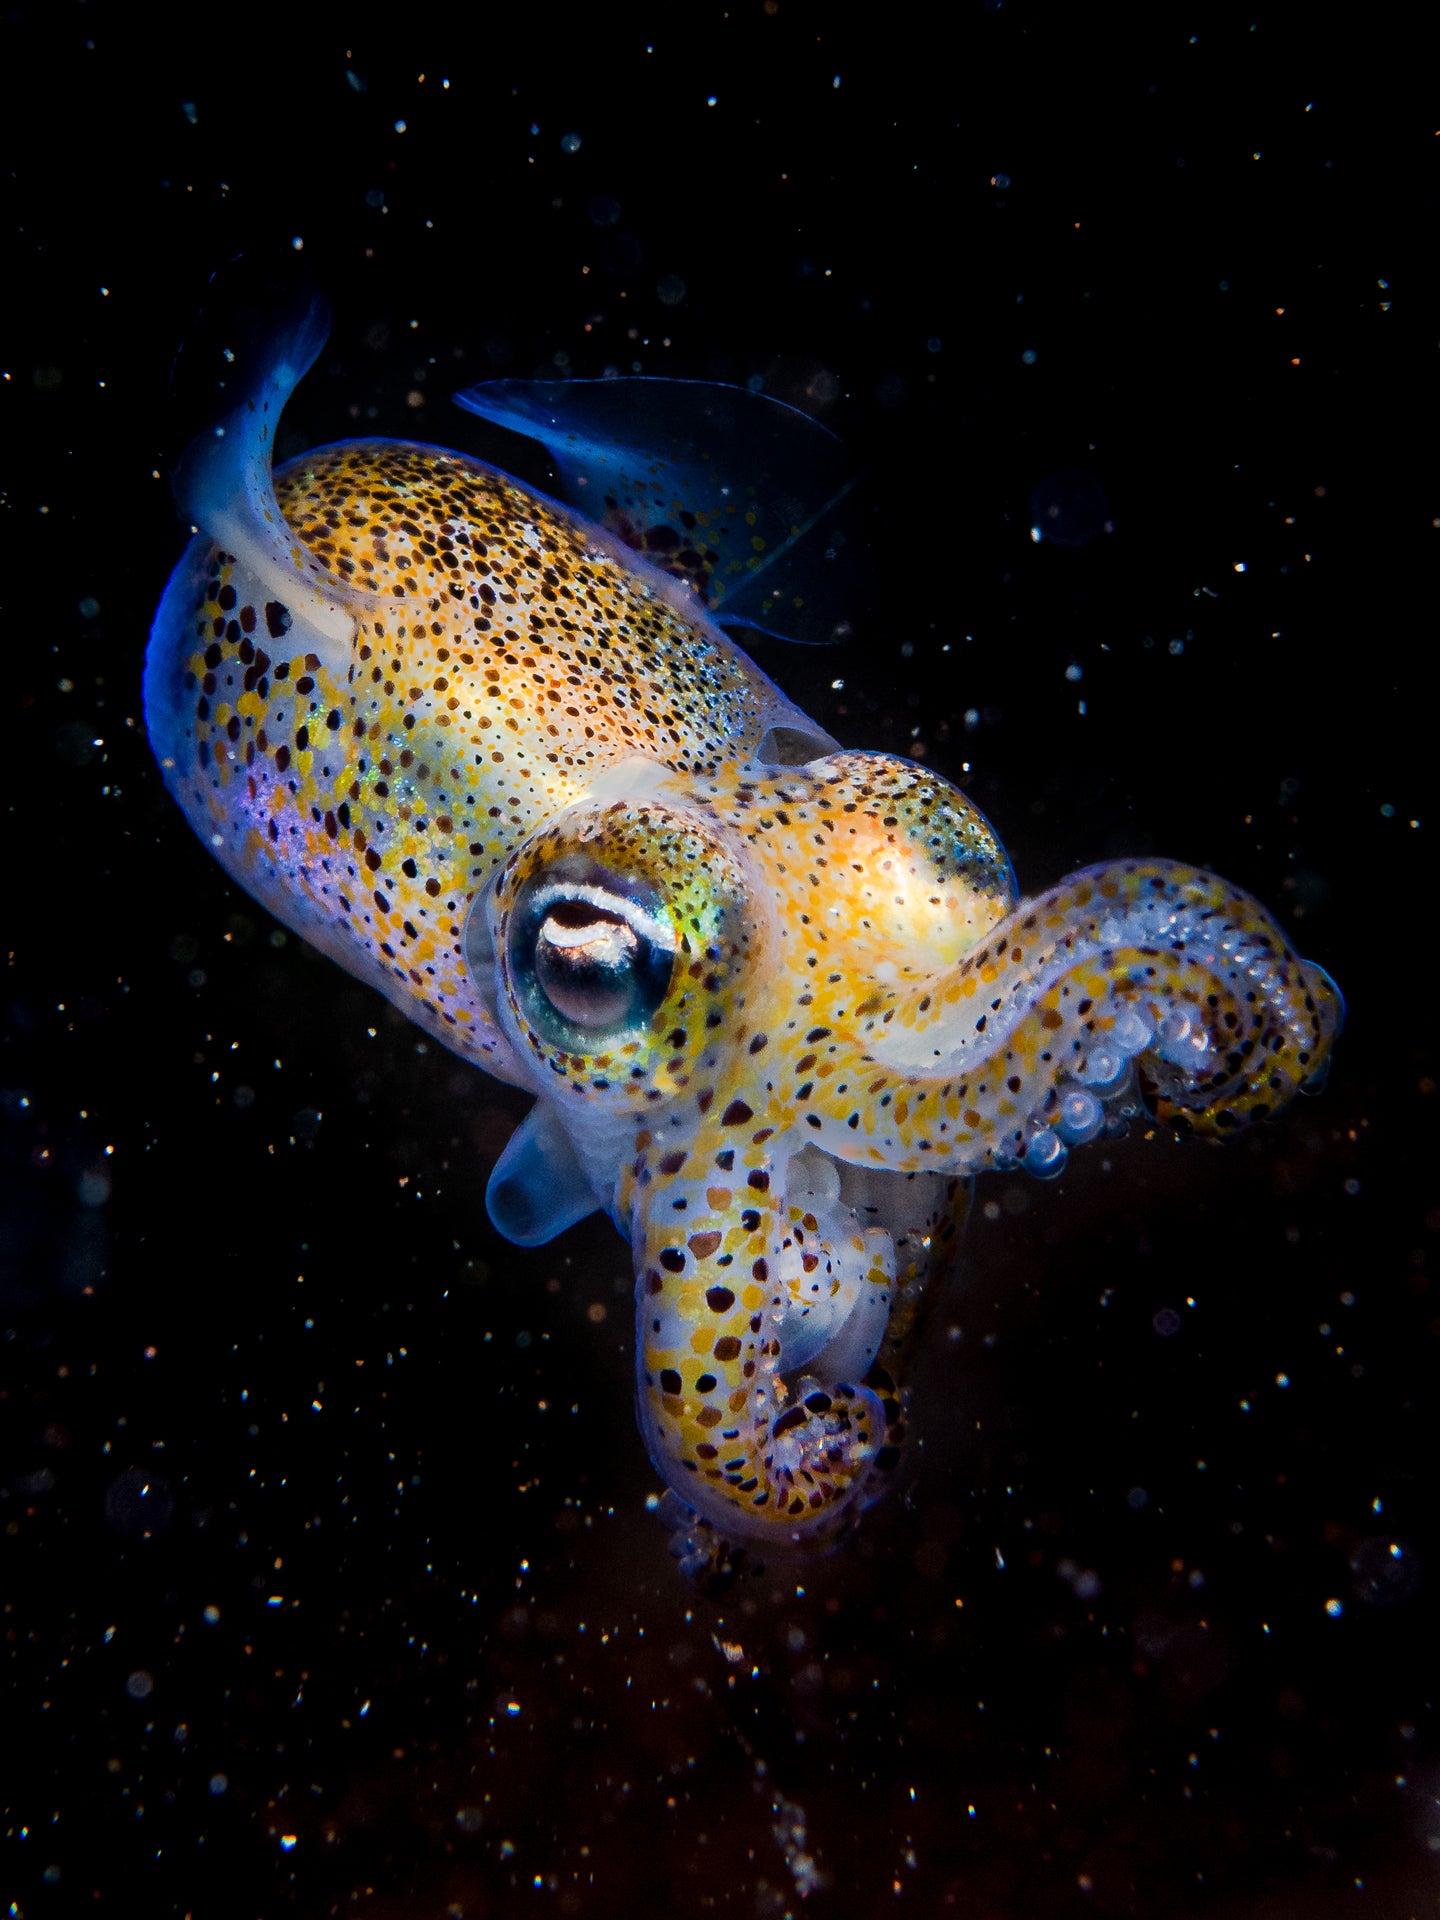 A bobtail squid at night. (Photo: Kirsty Andrews)